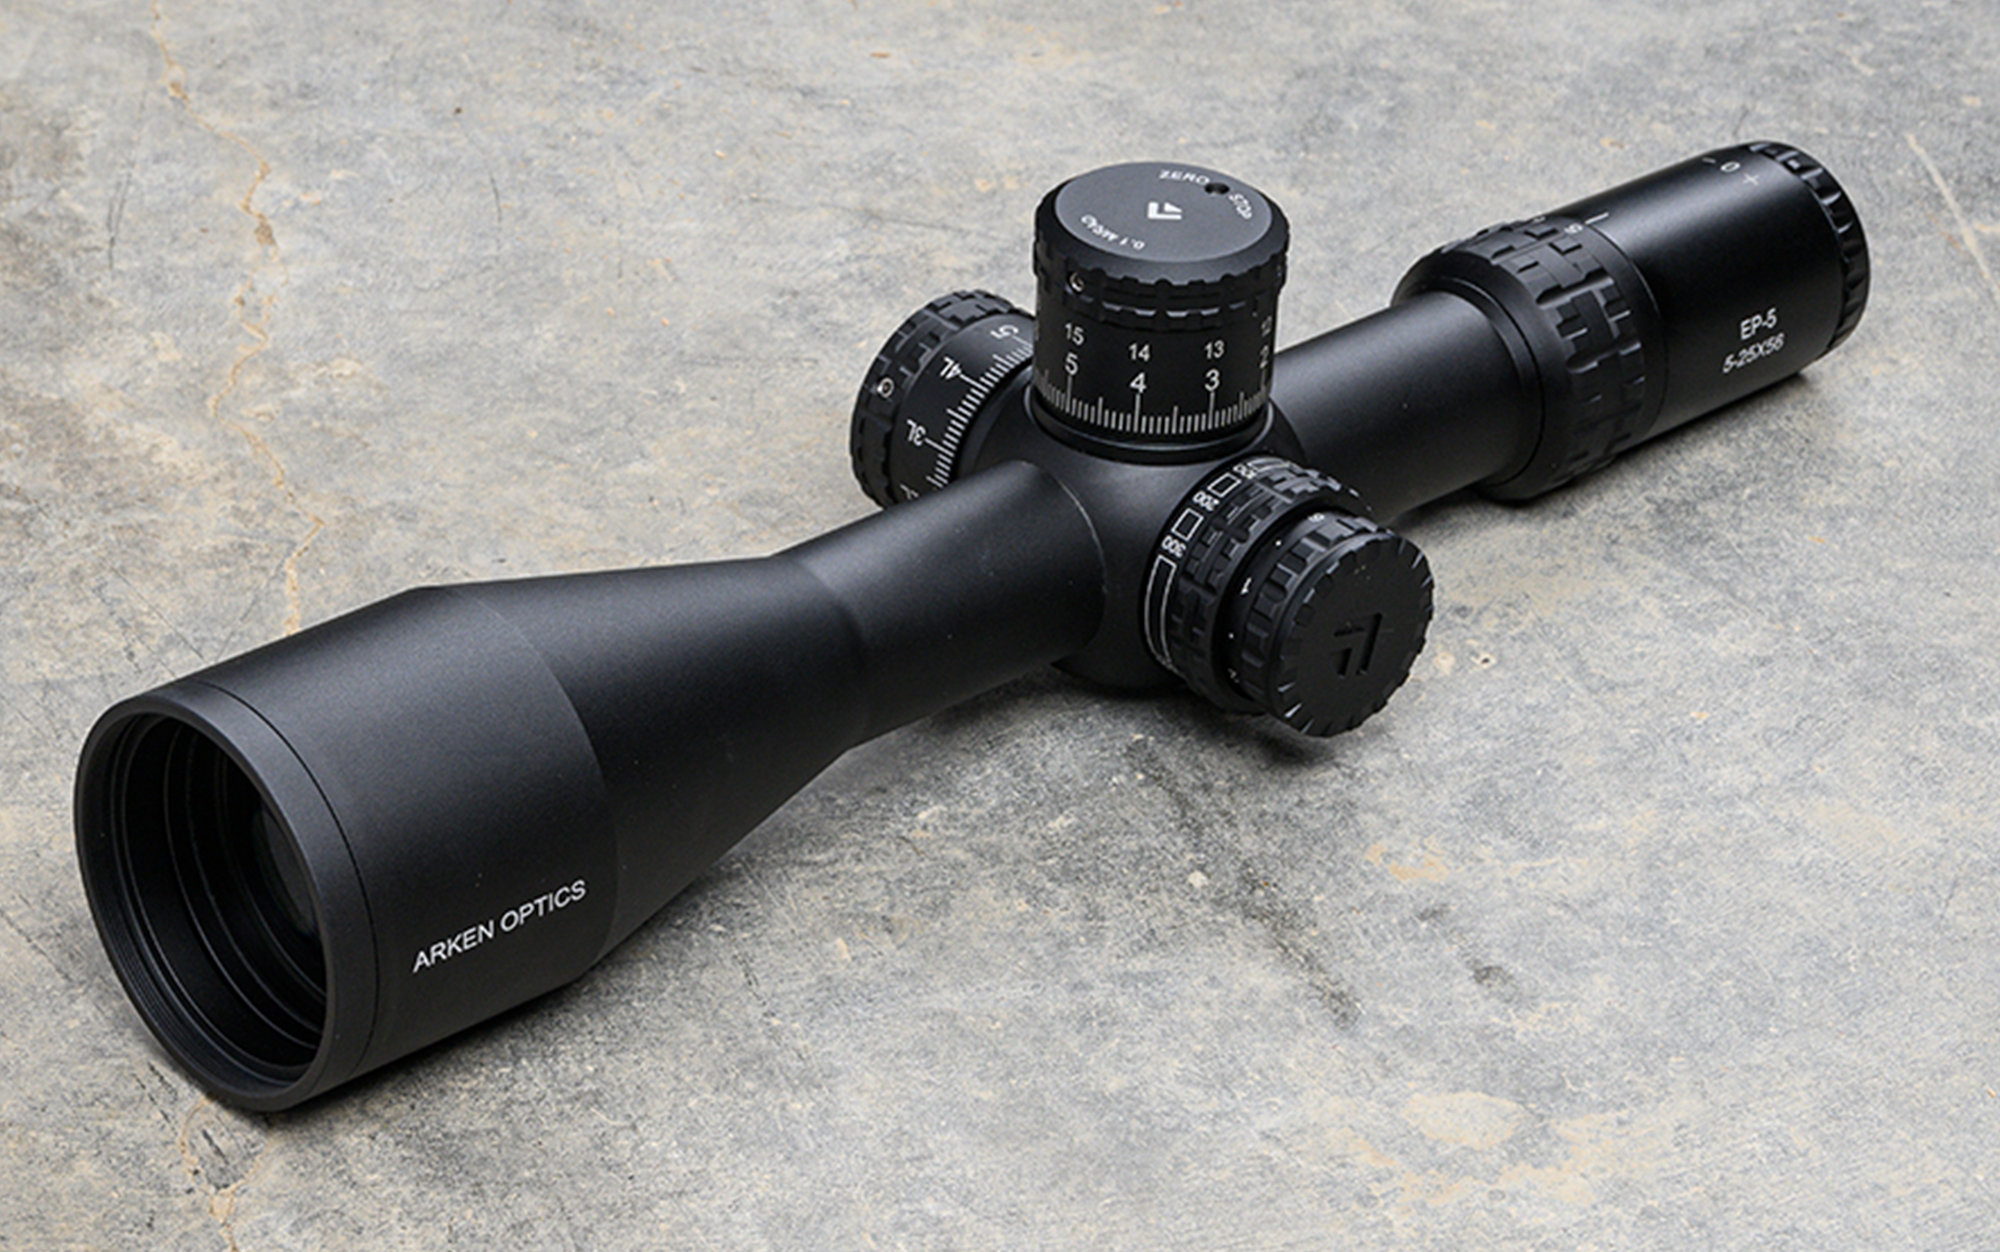 The Arken EP5 5-25x56 is the best budget precision rifle scope.